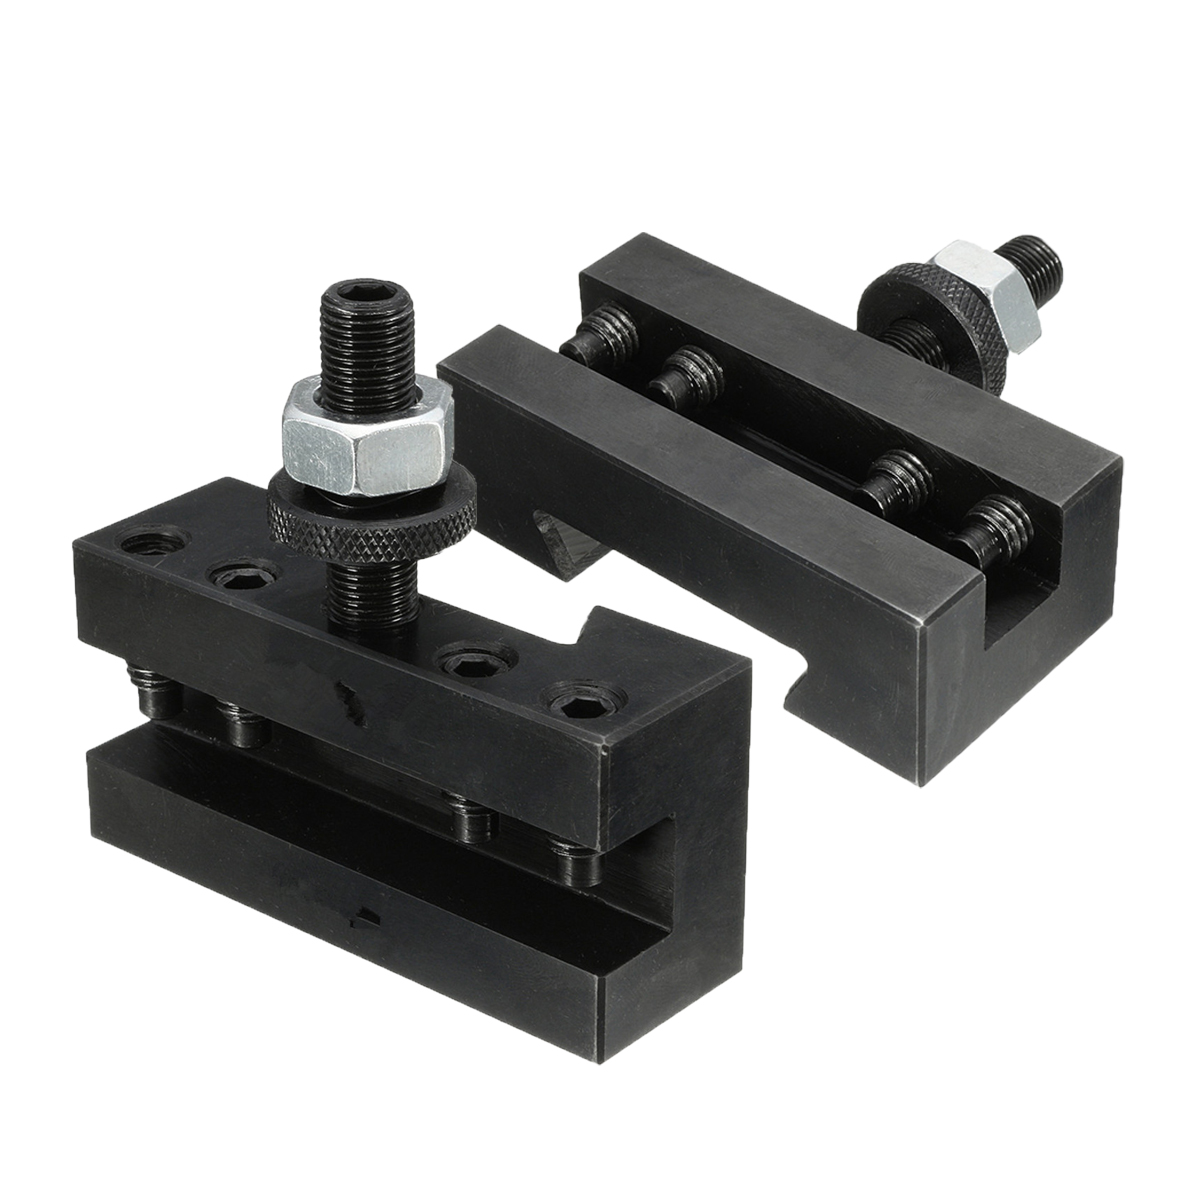 2-Piece-Set-Of-Machifit-250-000-Wedge-Main-Body-Tool-Holder-Exclusively-For-250-100250-111-Tool-Hold-1824364-3